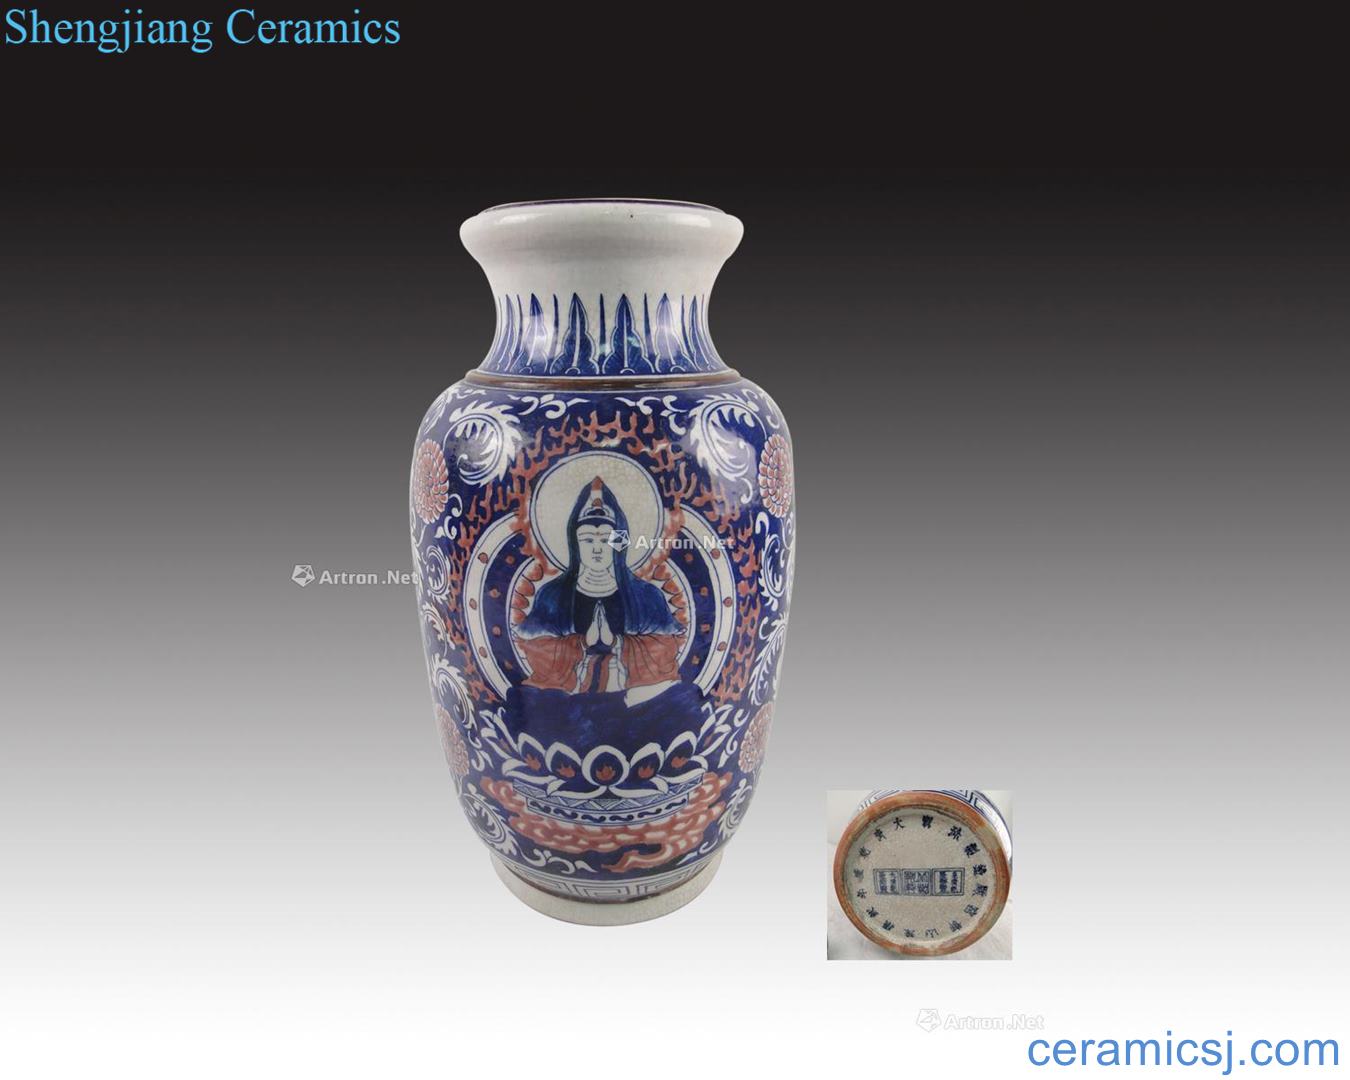 In the qing dynasty Blue and white youligong jug